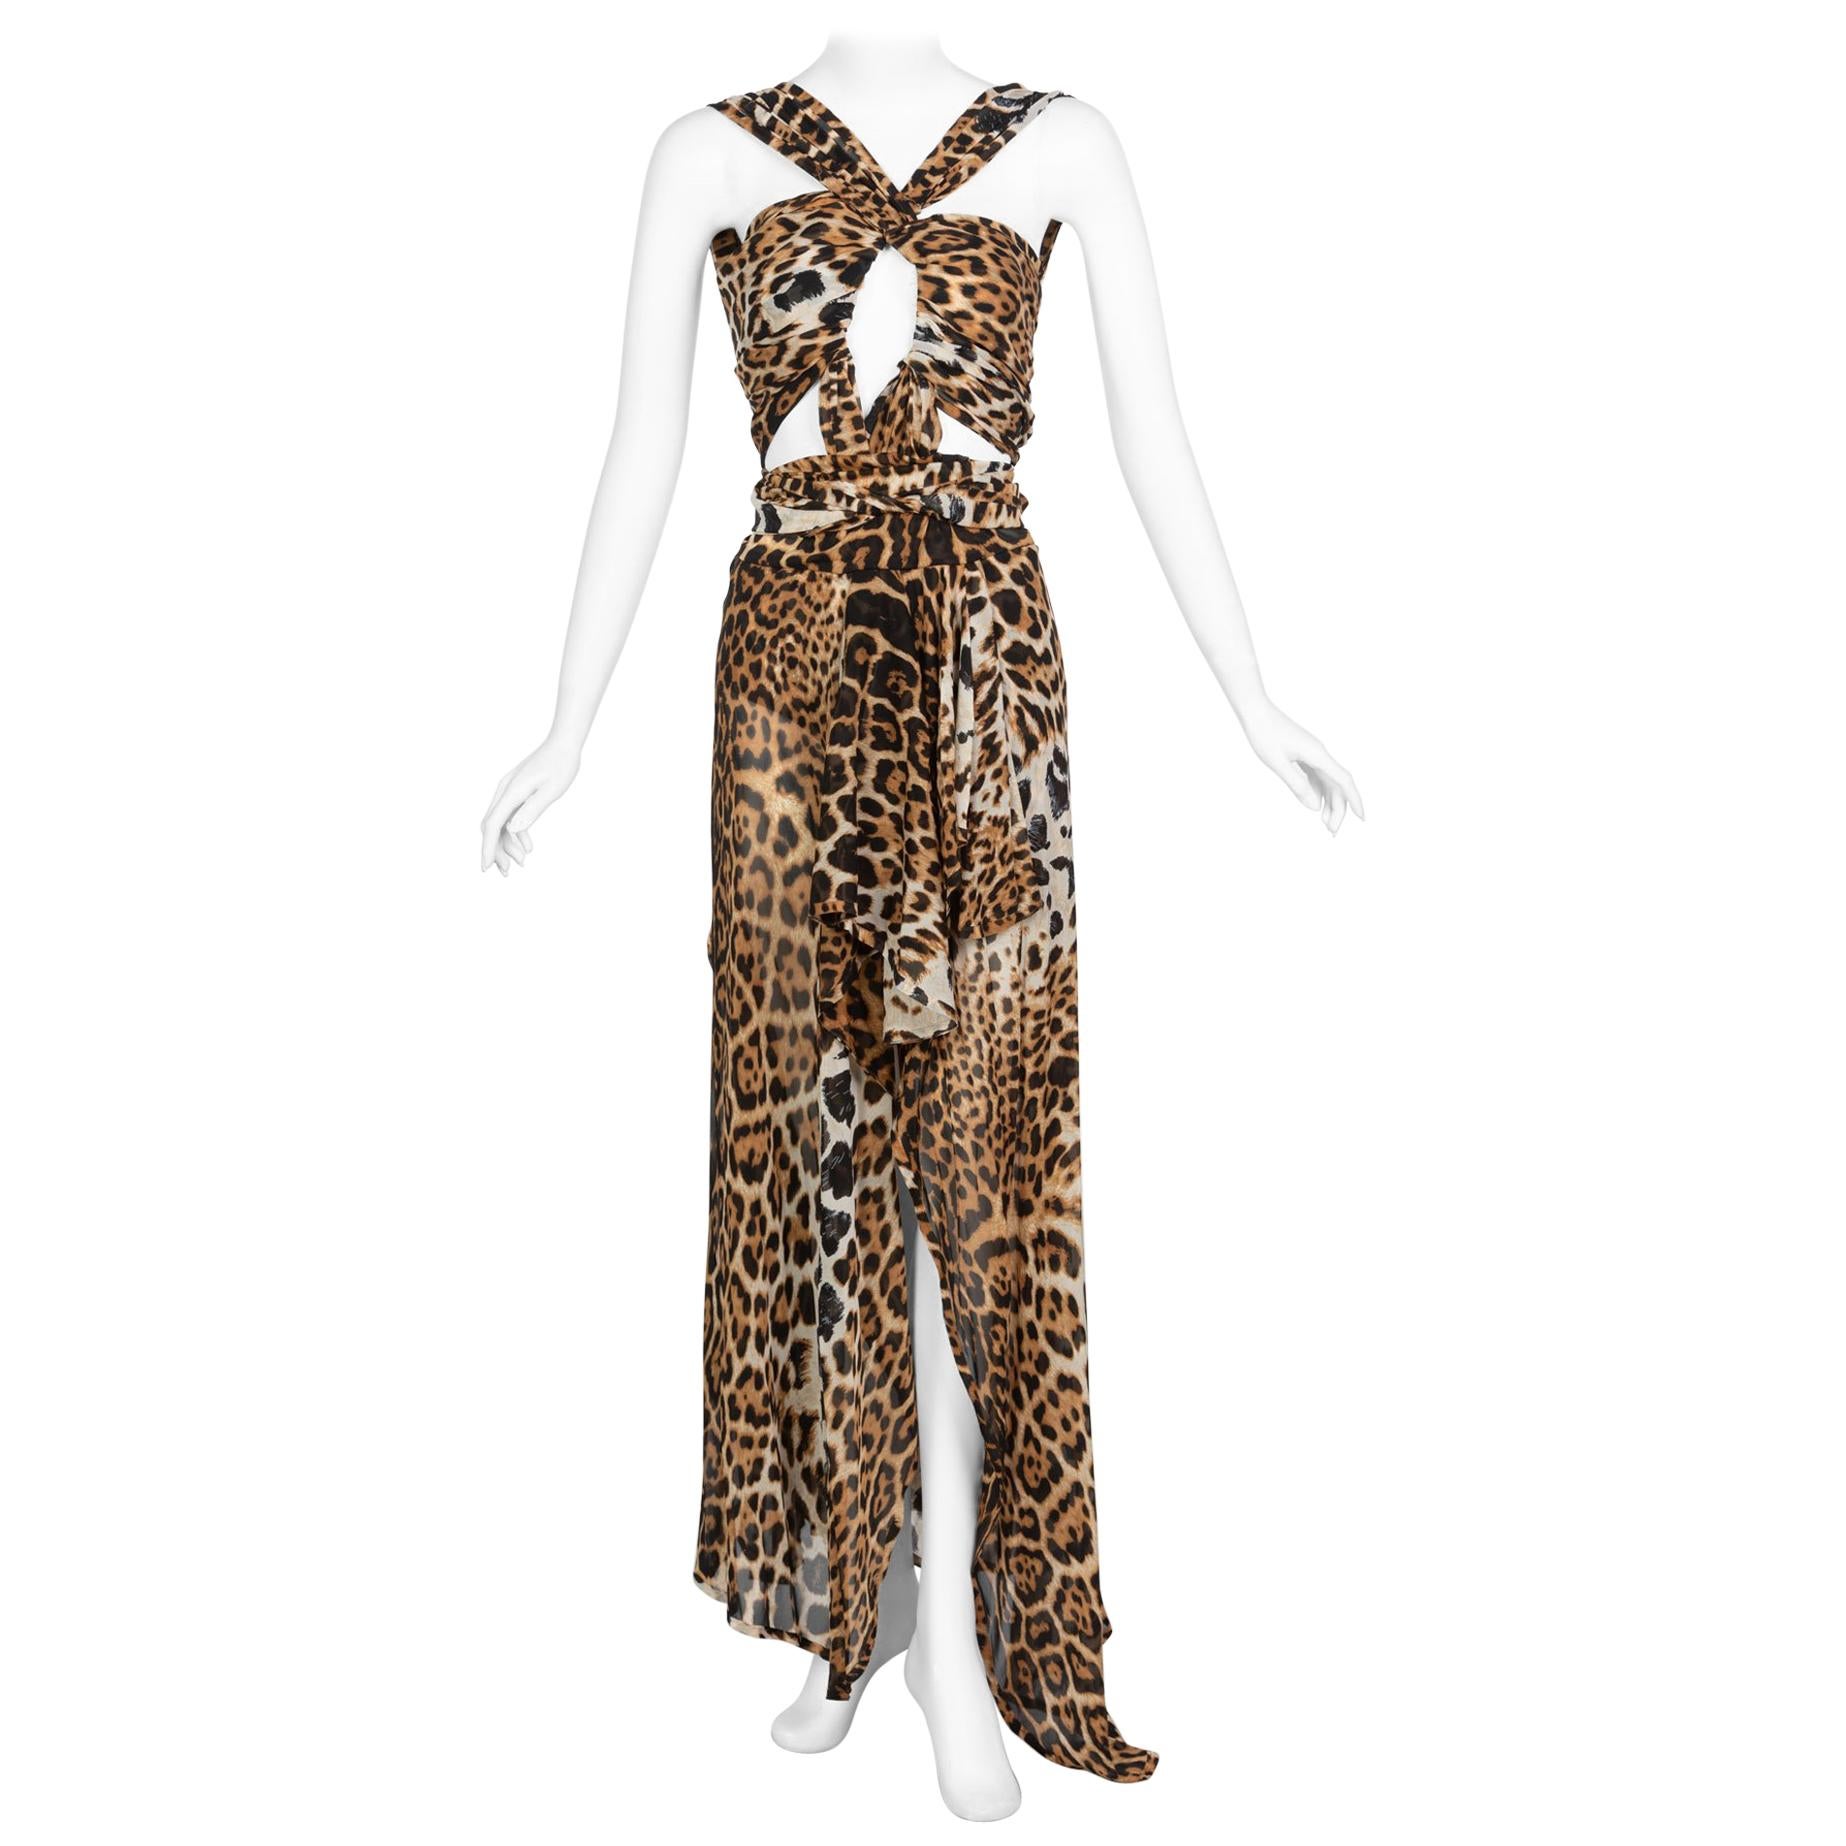  Yves Saint Laurent by Tom Ford Silk Leopard Cut Out Maxi Dress YSL, 2002 